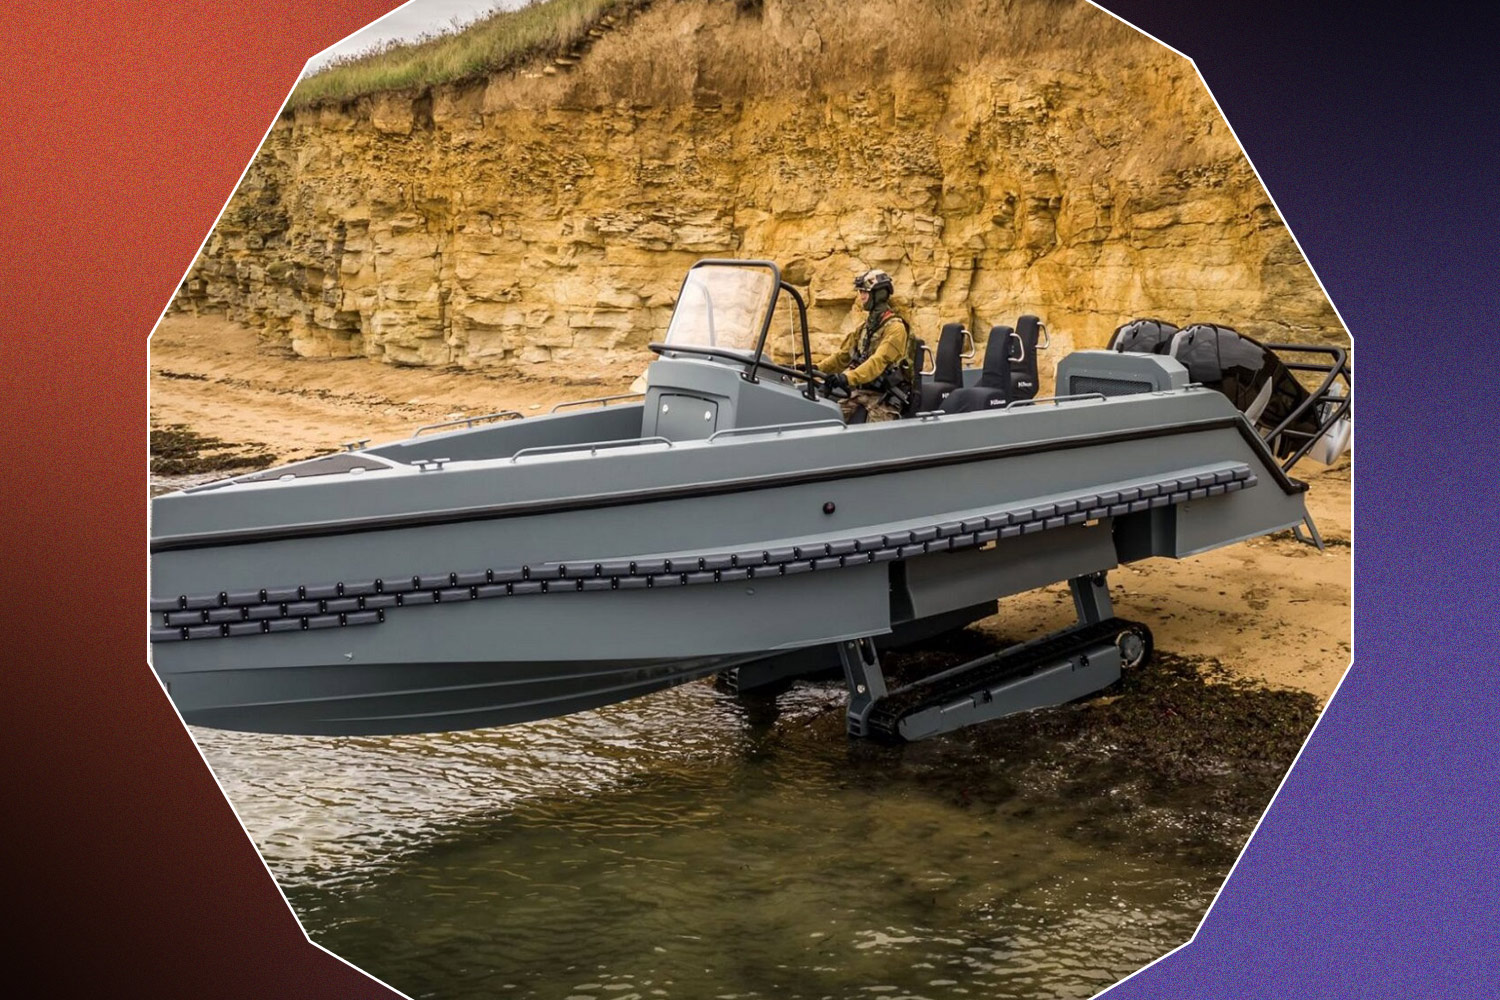 IG-PRO31 amphibious boat with treads out on a rocky shoreline on a black, red, and purple background